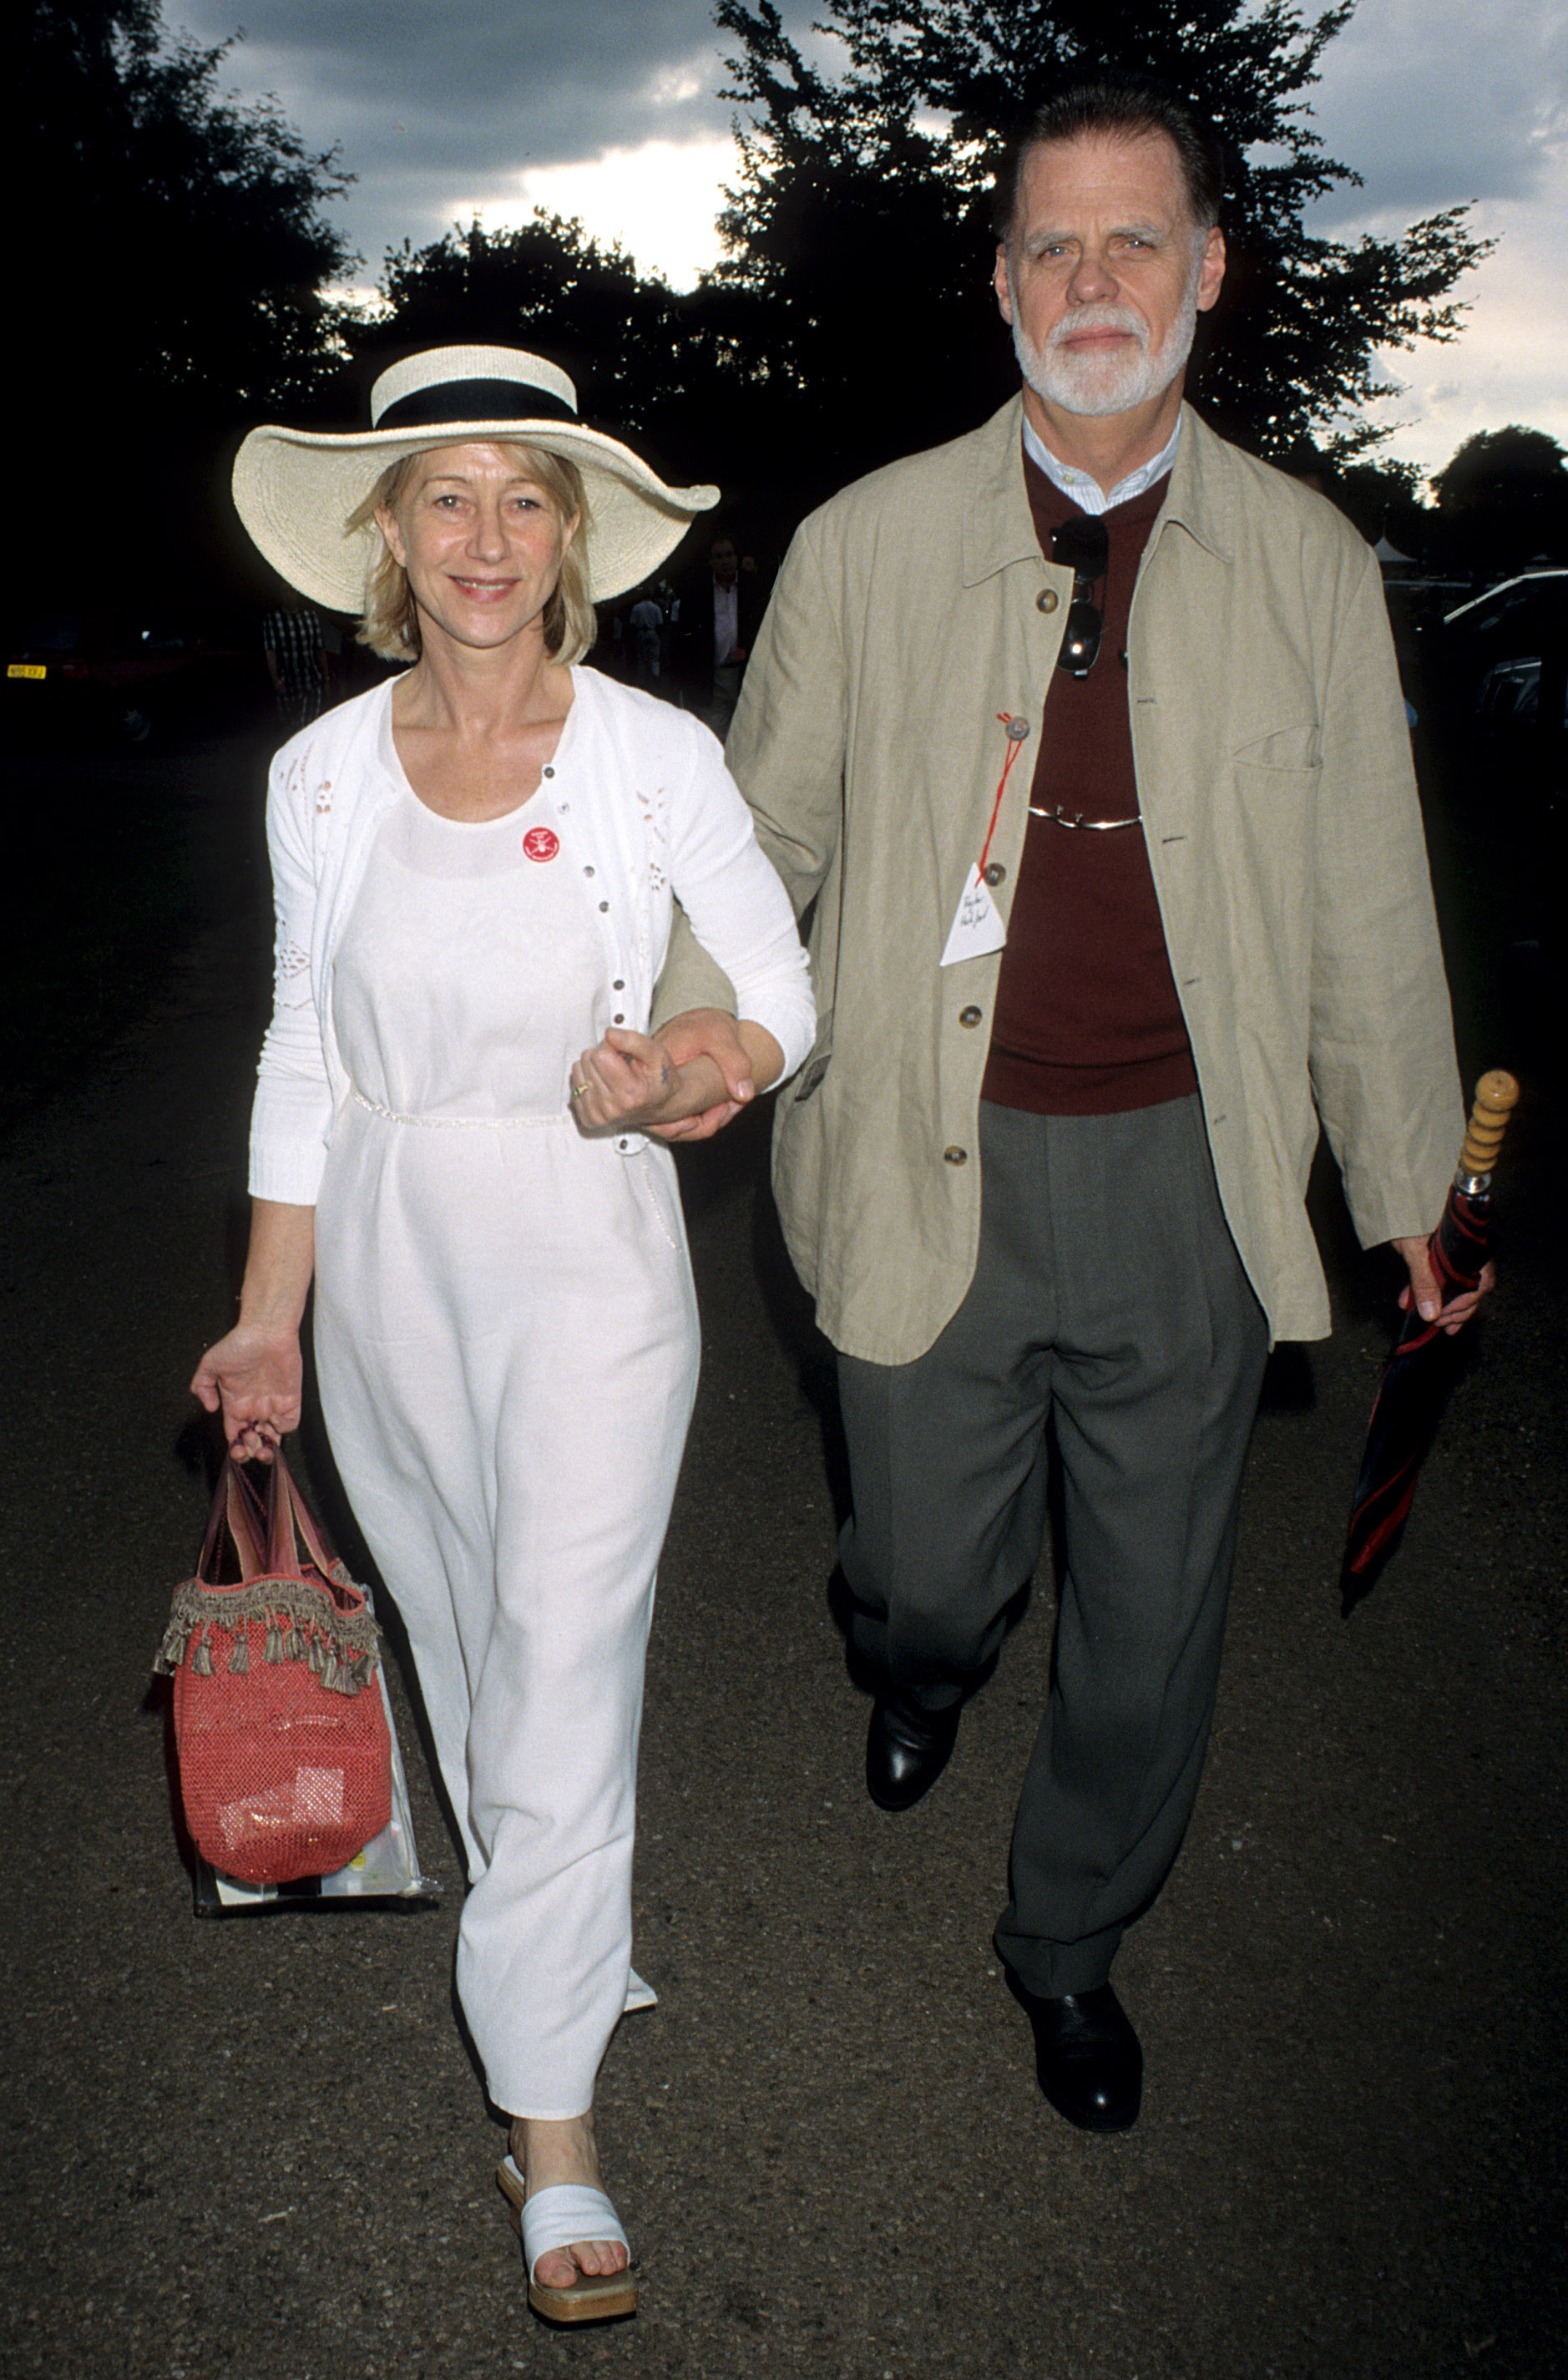 Helen Mirren and her husband Taylor Hackford at the Cartier Polo in 2000 | Source: Getty Images